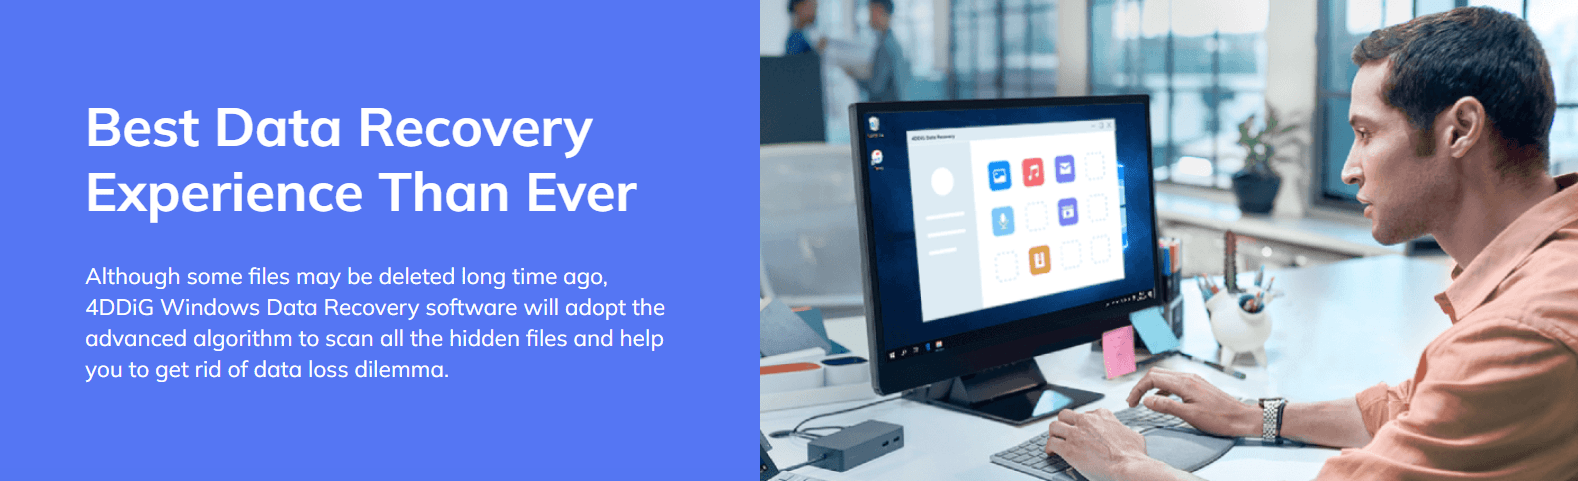 Best Data Recovery Experience Than Ever